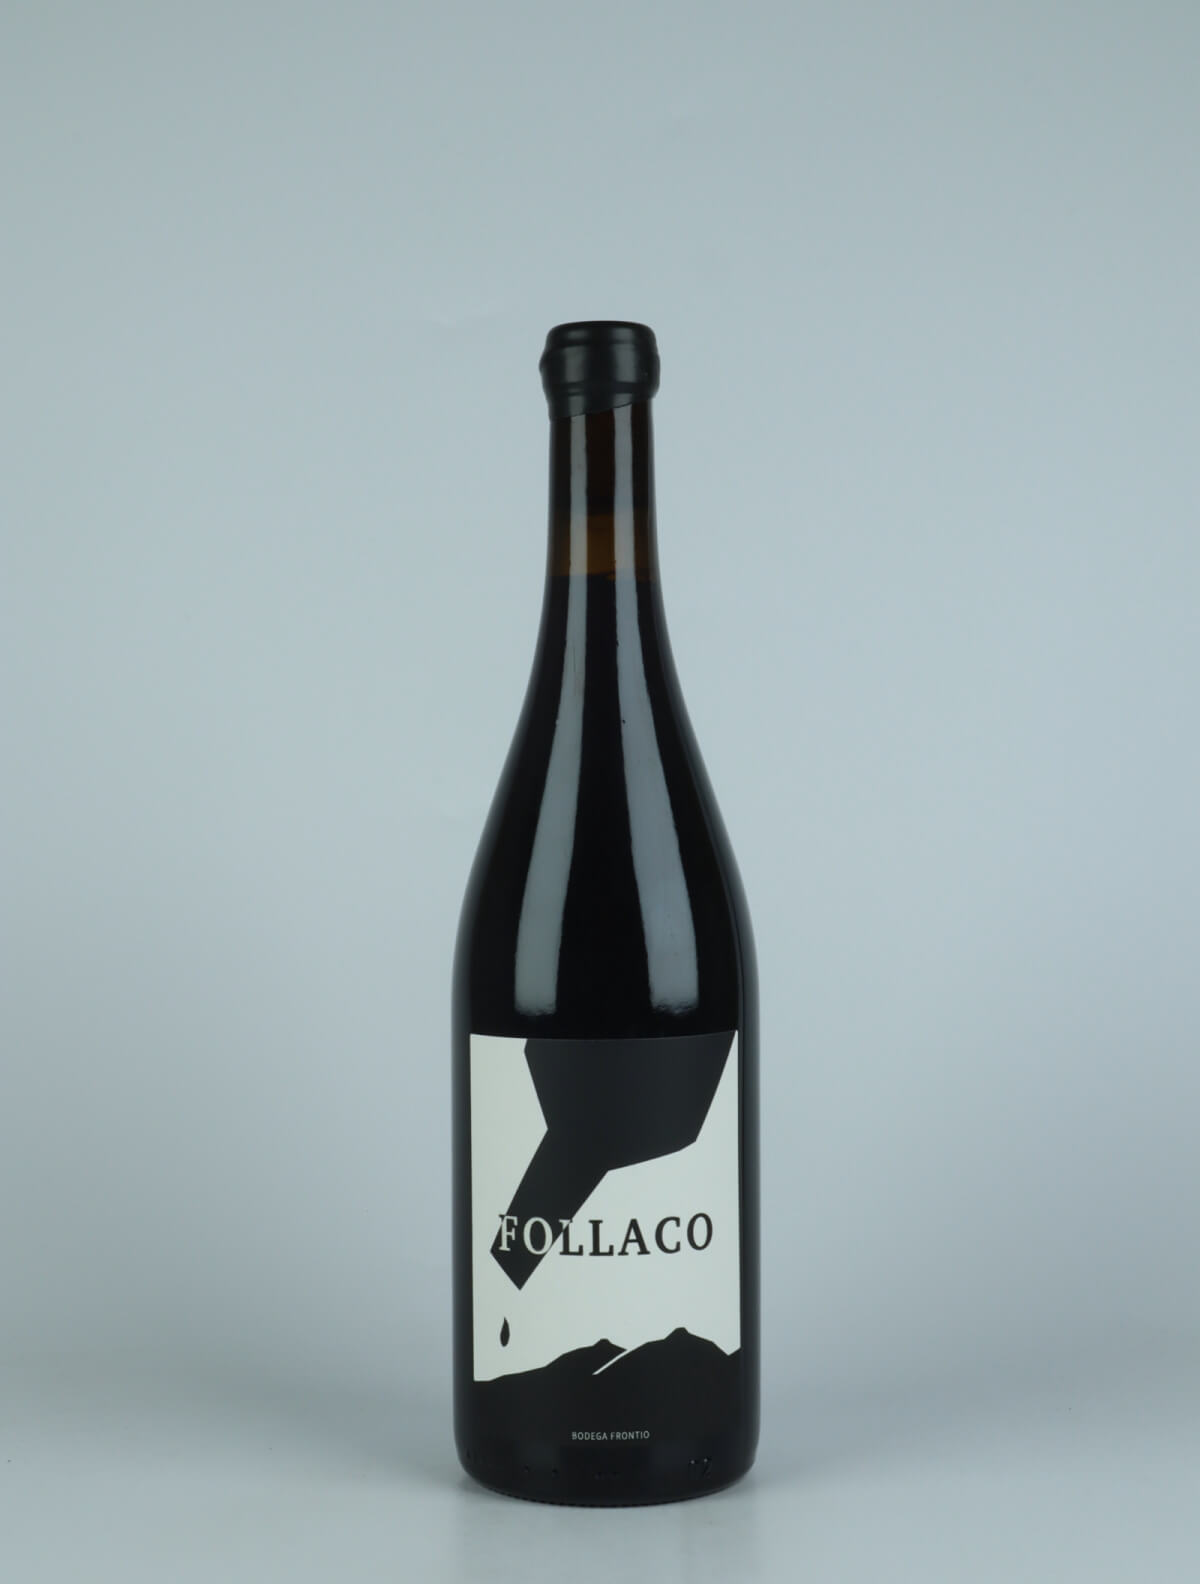 A bottle 2021 Follaco Red wine from Bodega Frontio, Arribes in Spain